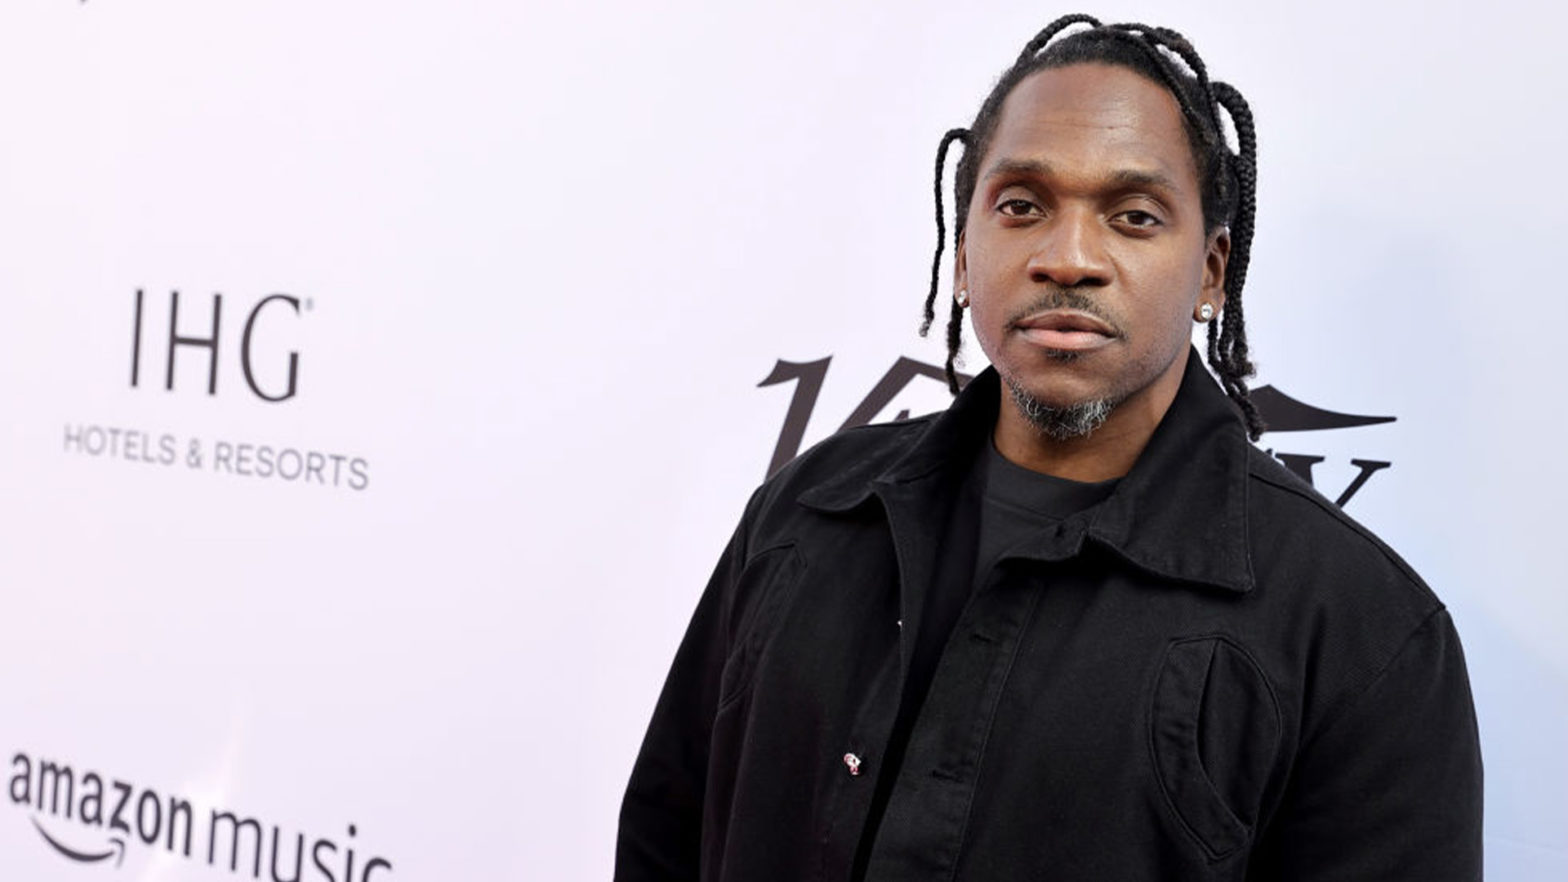 Pusha T Confirms He's No Longer President Of Kanye West's G.O.O.D. Music Label